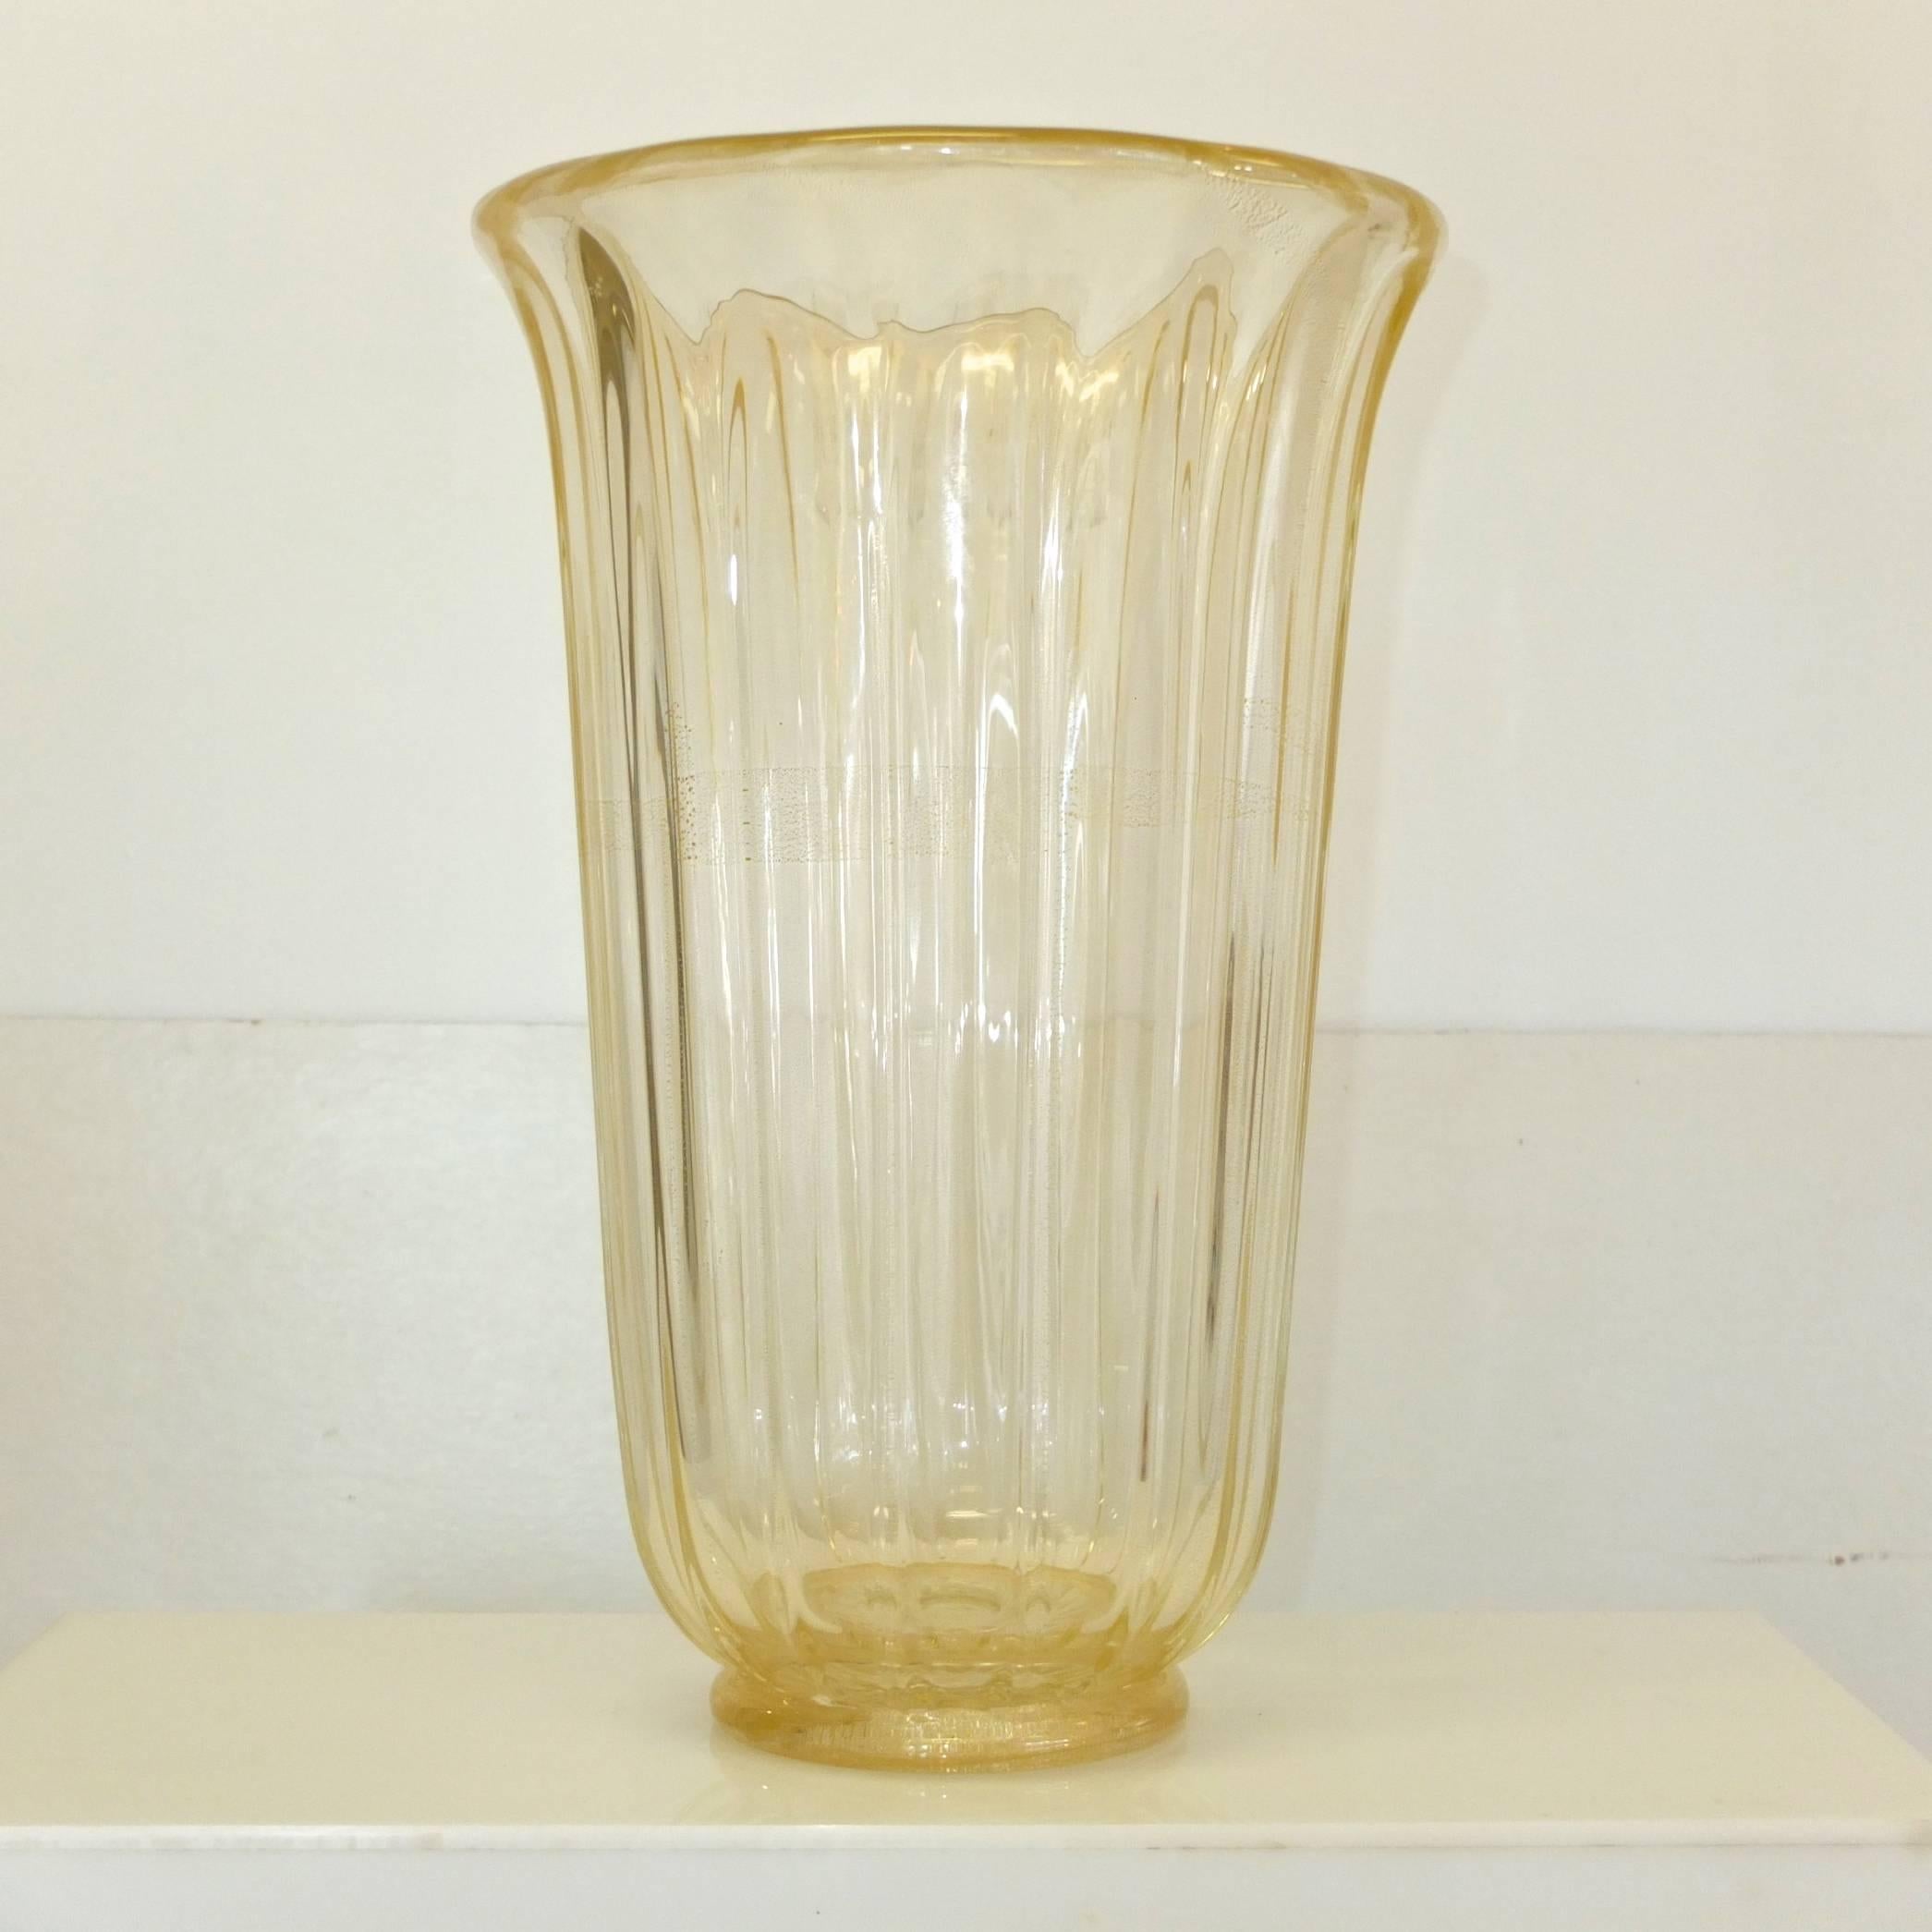 Large-scale Murano glass flower vase embedded with pure gold flecks and controlled bubbles. Signed Seguso V. D'Arte. Fluted bell form. 18 inches tall, 12 inches diameter. Excellent condition.